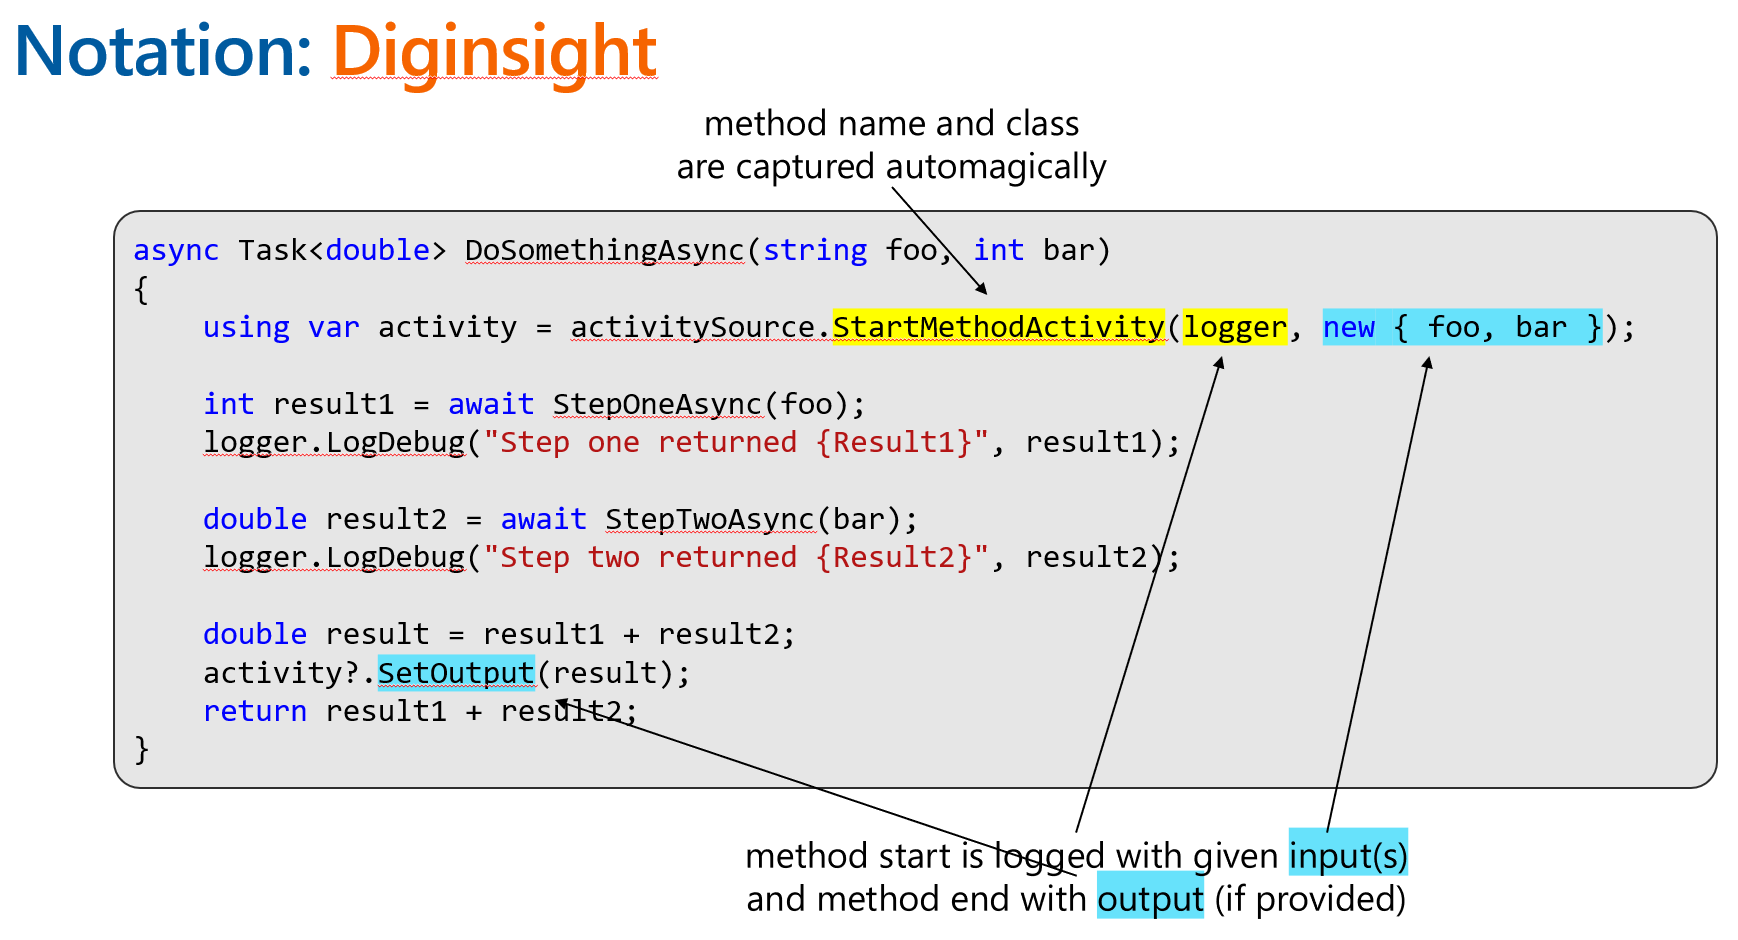 003.01 Code span with diginsight.png